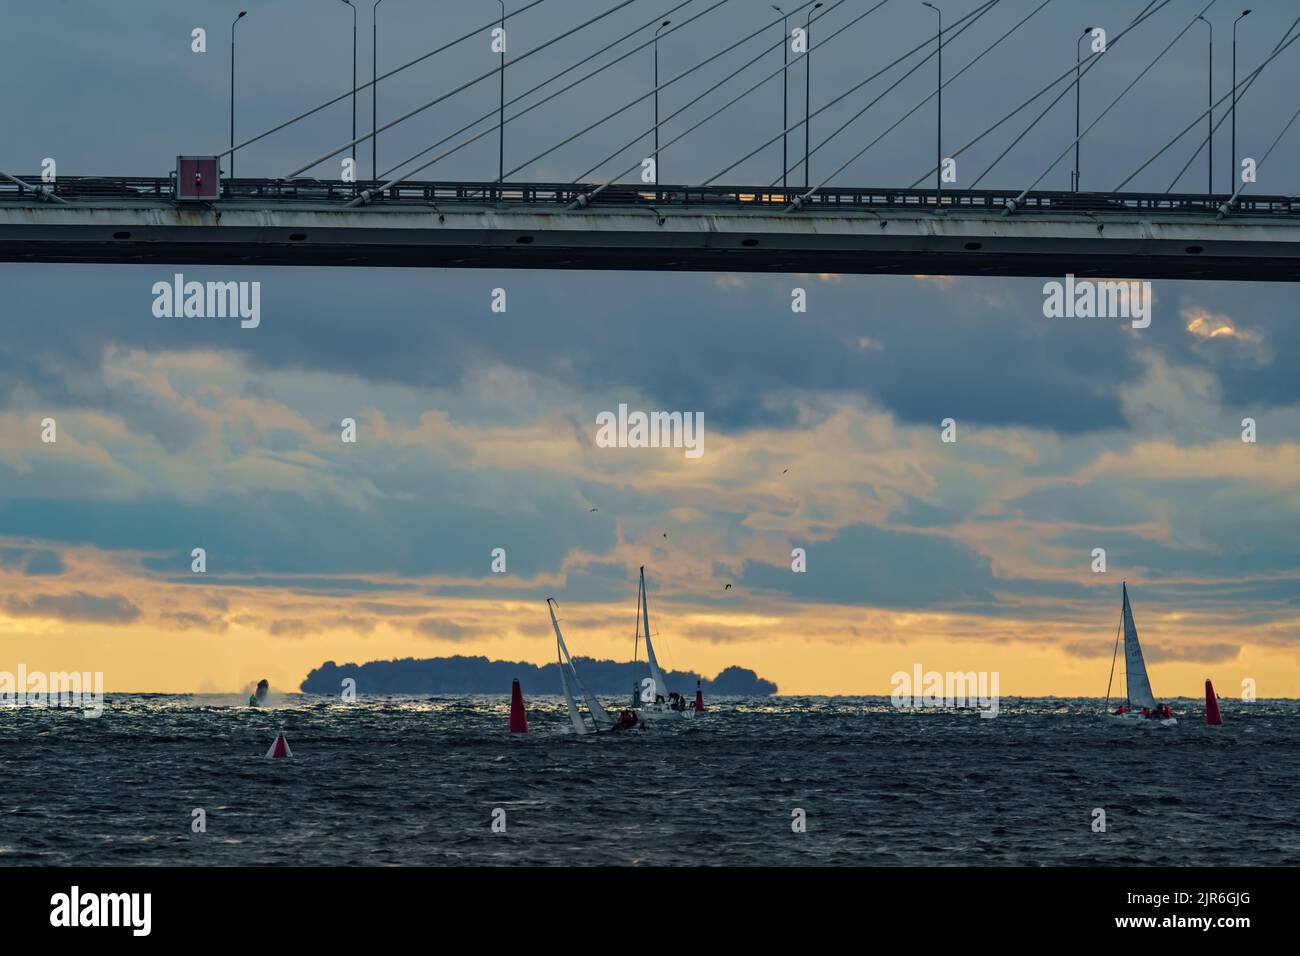 Russia, St. Petersburg, 29 July 2022: Few small sport sailing boats at sunset with stormy sky, highly cable-stayed bridge on background Stock Photo